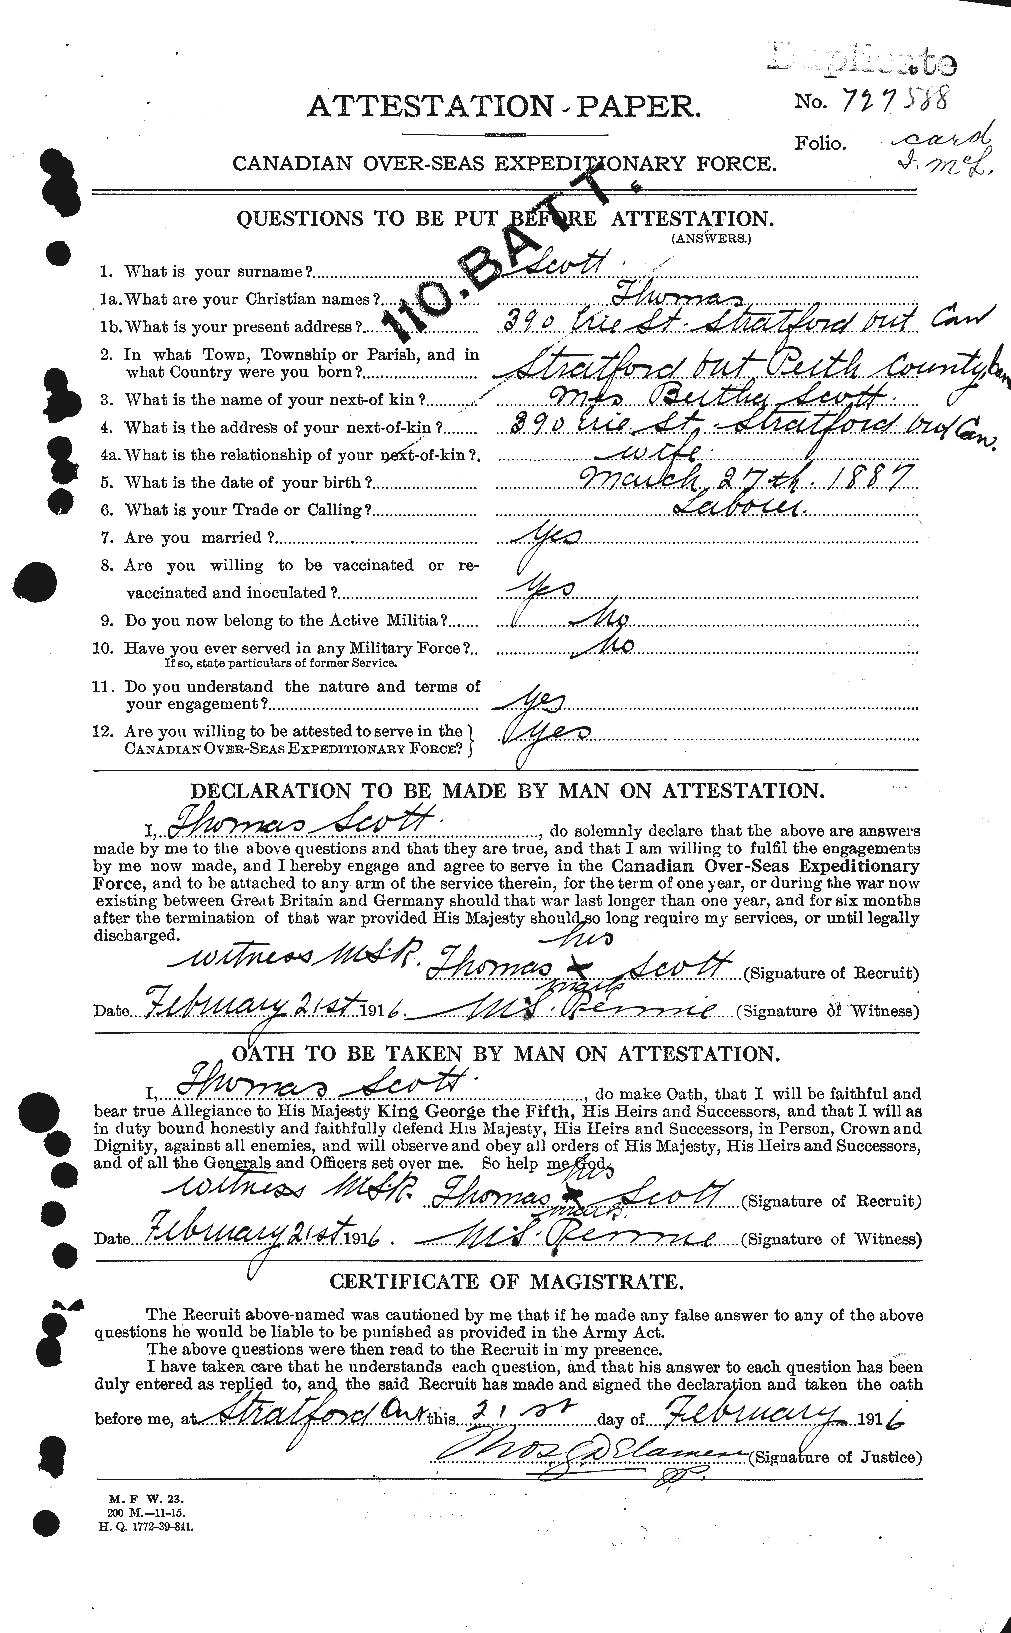 Personnel Records of the First World War - CEF 088540a